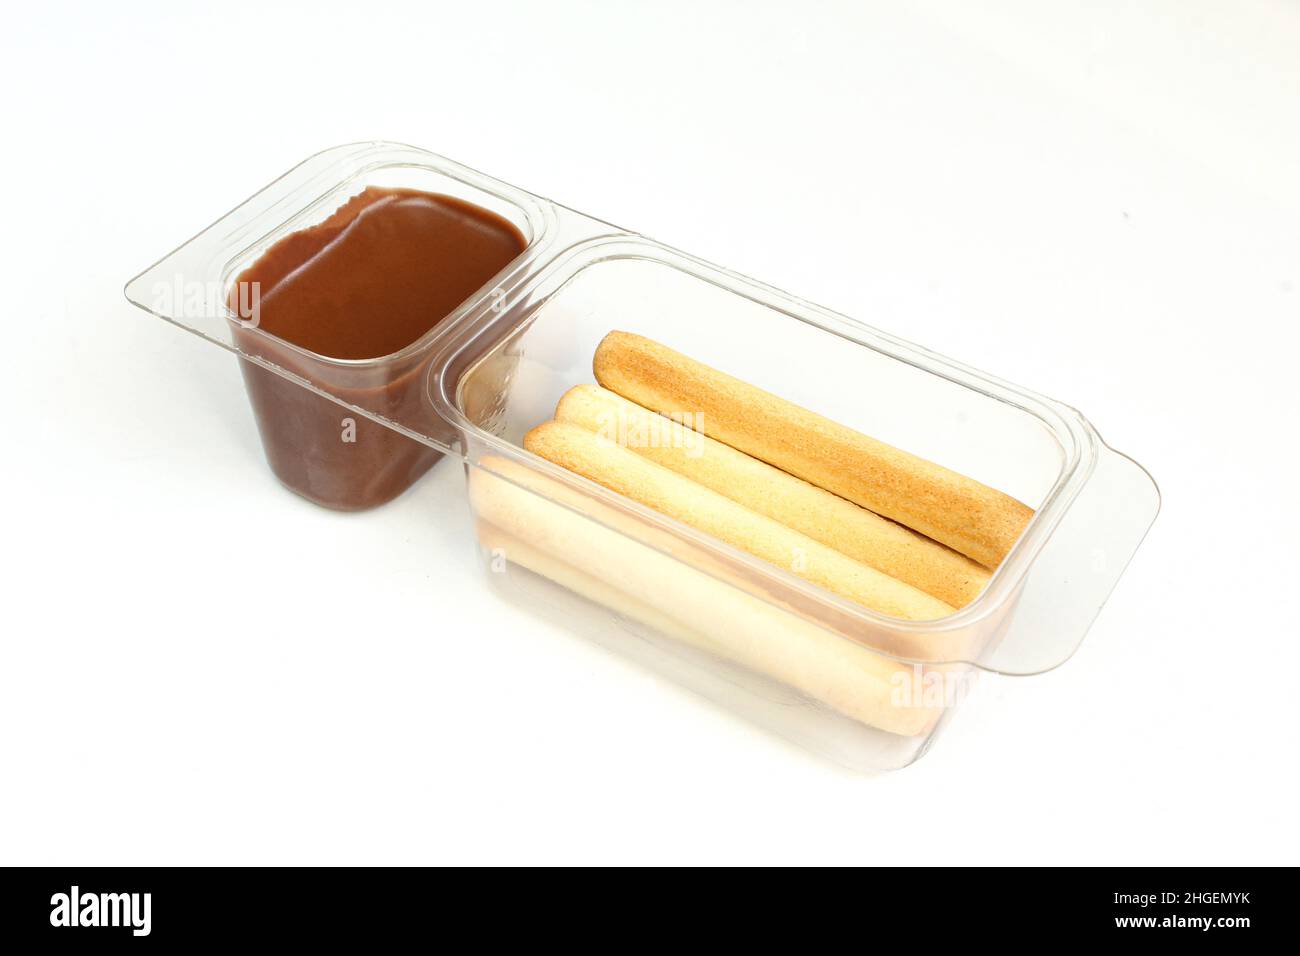 Chocolate cream in transparent plastic container. Sweet wafer sticks and brown hazelnut cream isolated on white Stock Photo